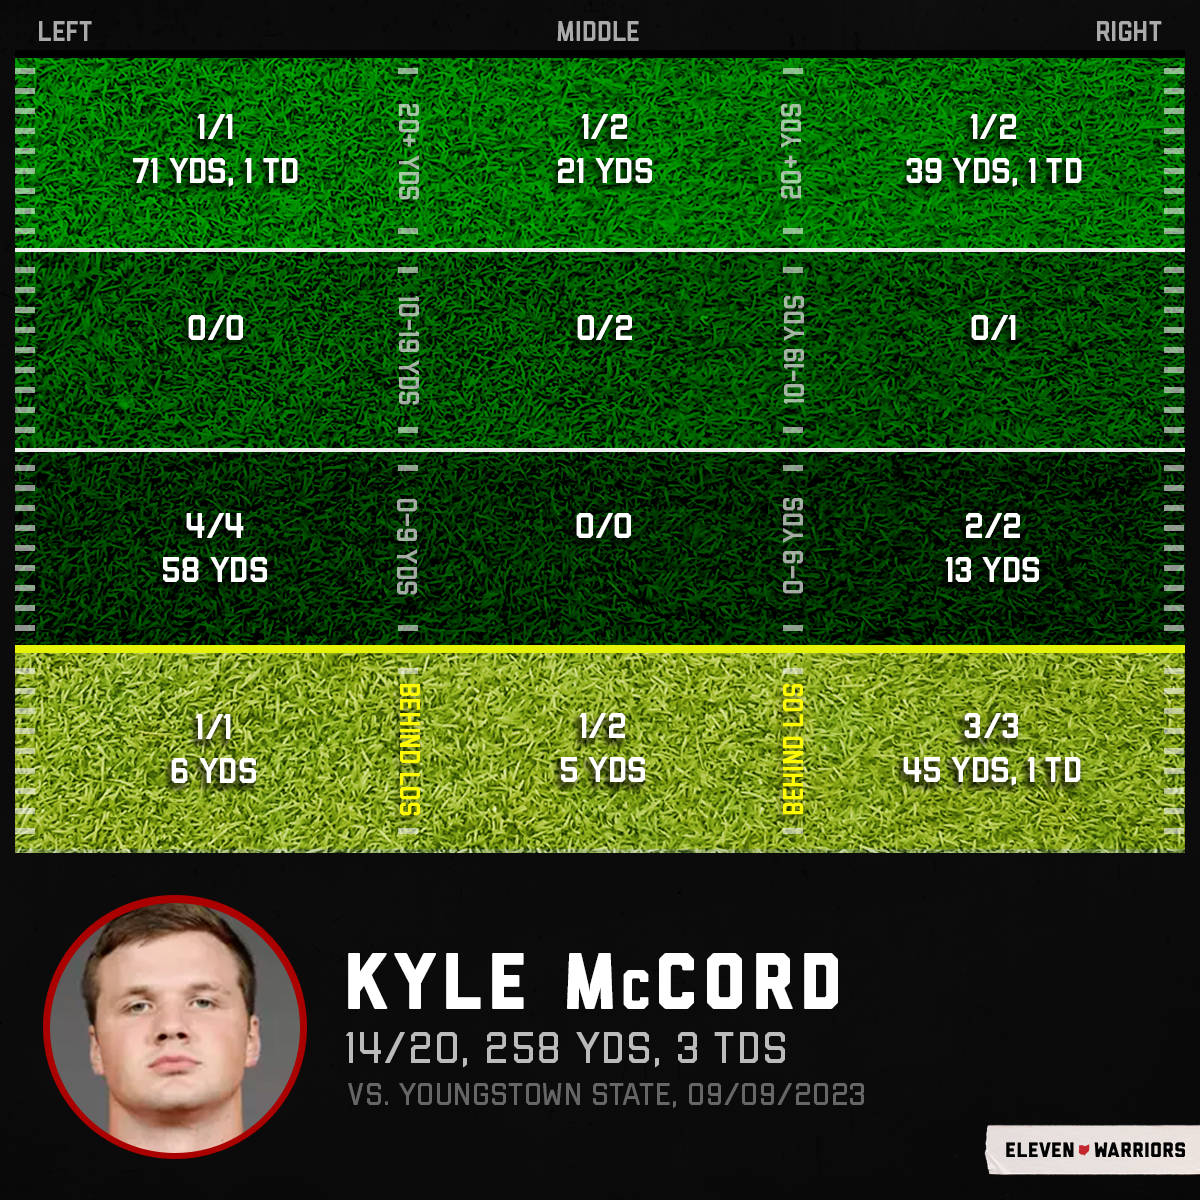 Kyle McCord vs. Youngstown State